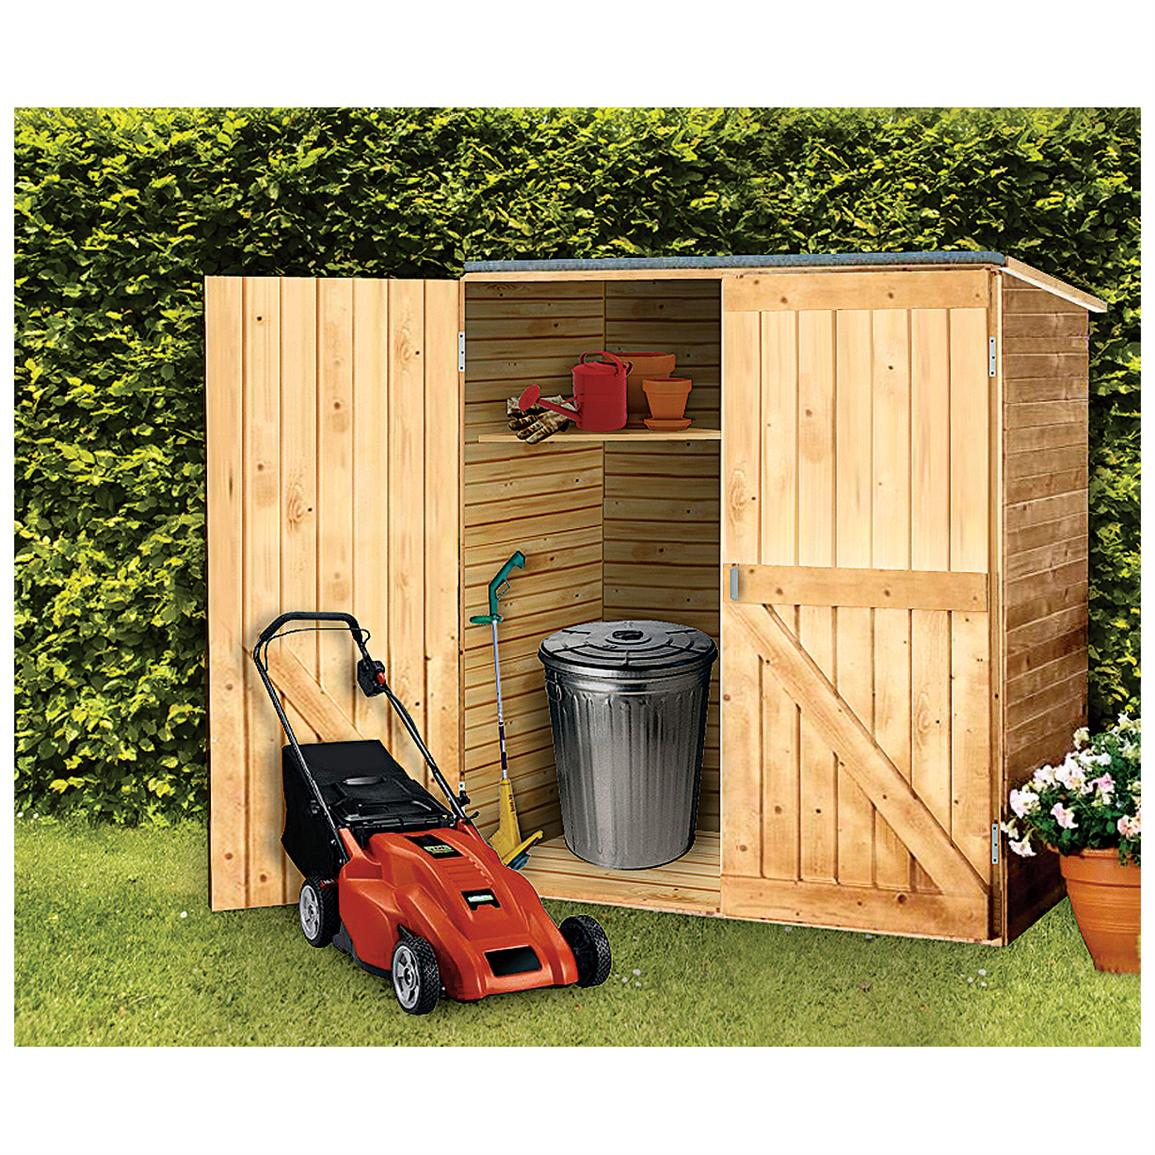 Solid Wood Outdoor Storage Shed 236390 Patio Storage At intended for proportions 1155 X 1155